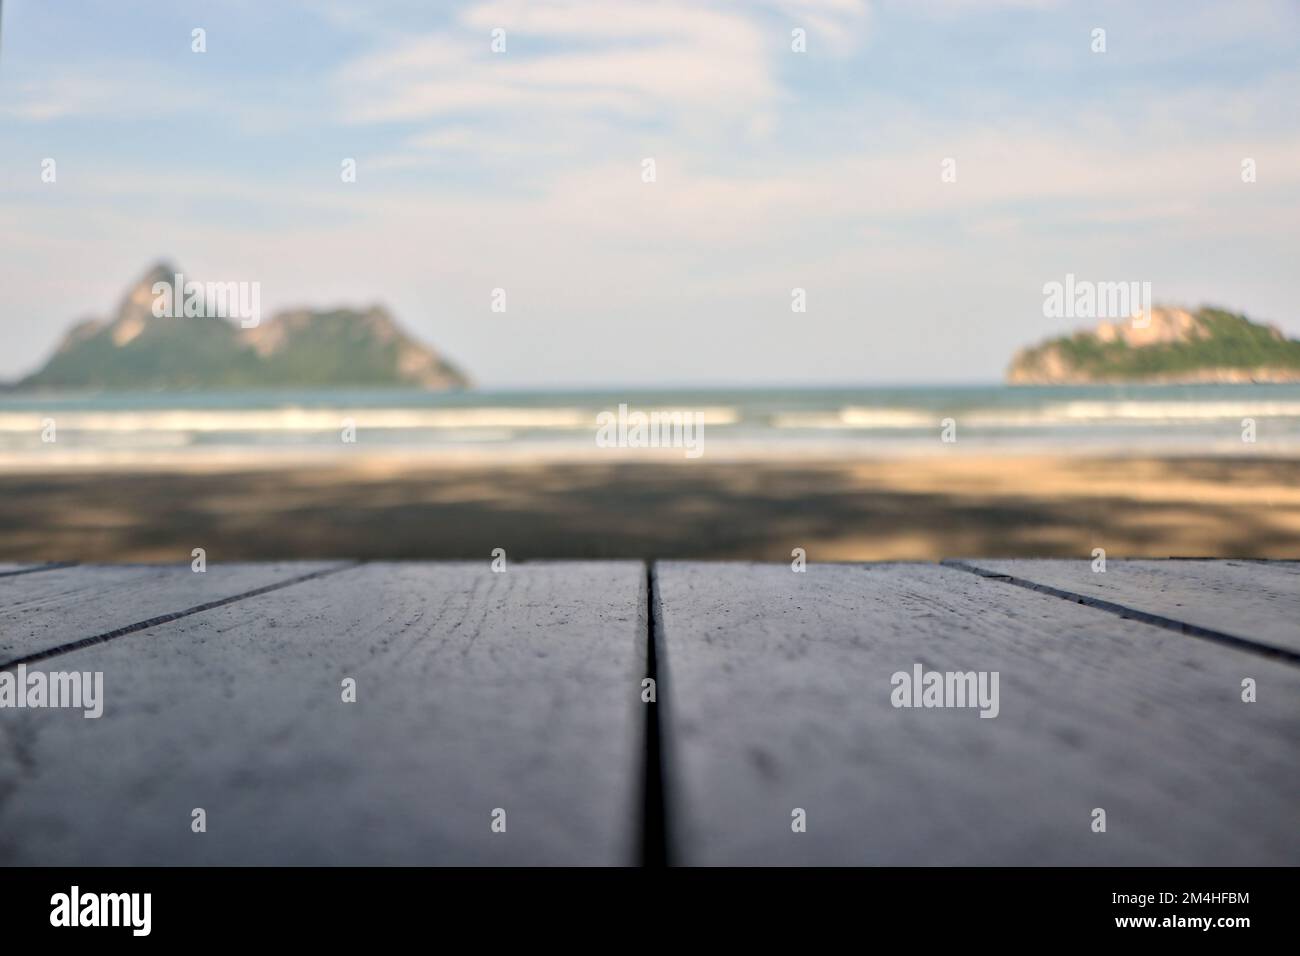 A wooden table on the sand with an island in the middle of the sea in the background. Stock Photo